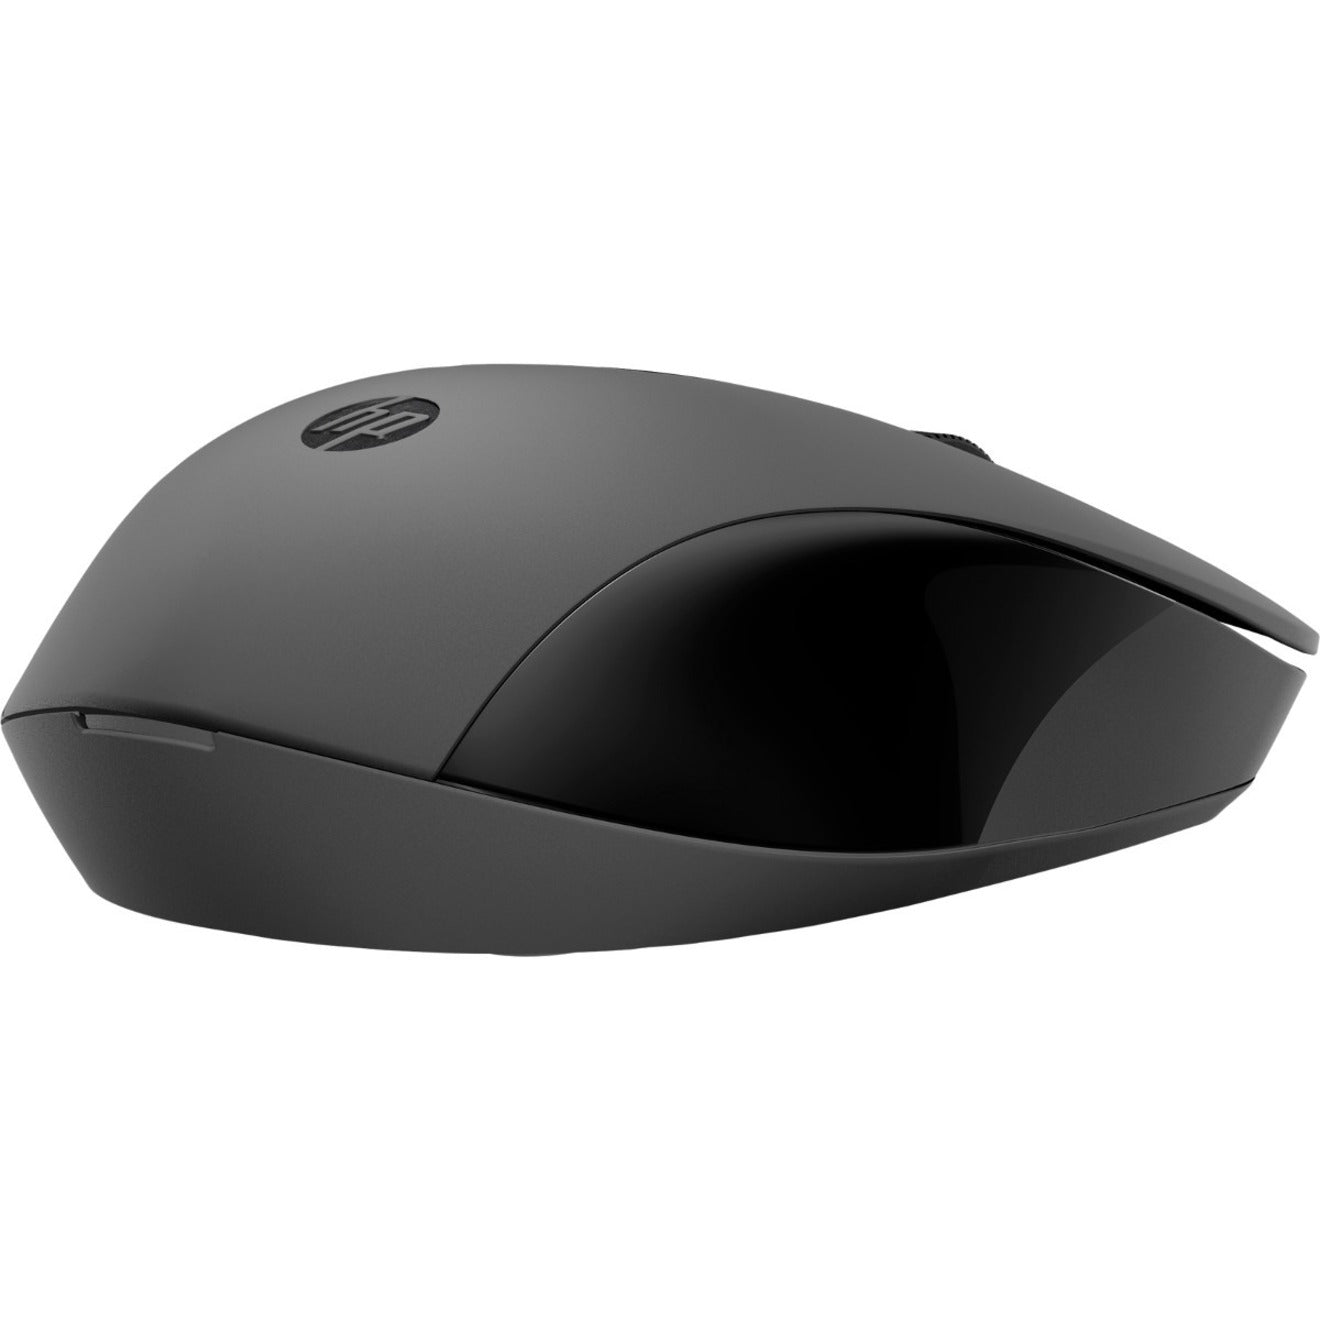 HP 2S9L1AA 150 Wireless Mouse, 2.4 GHz Optical, USB Type A